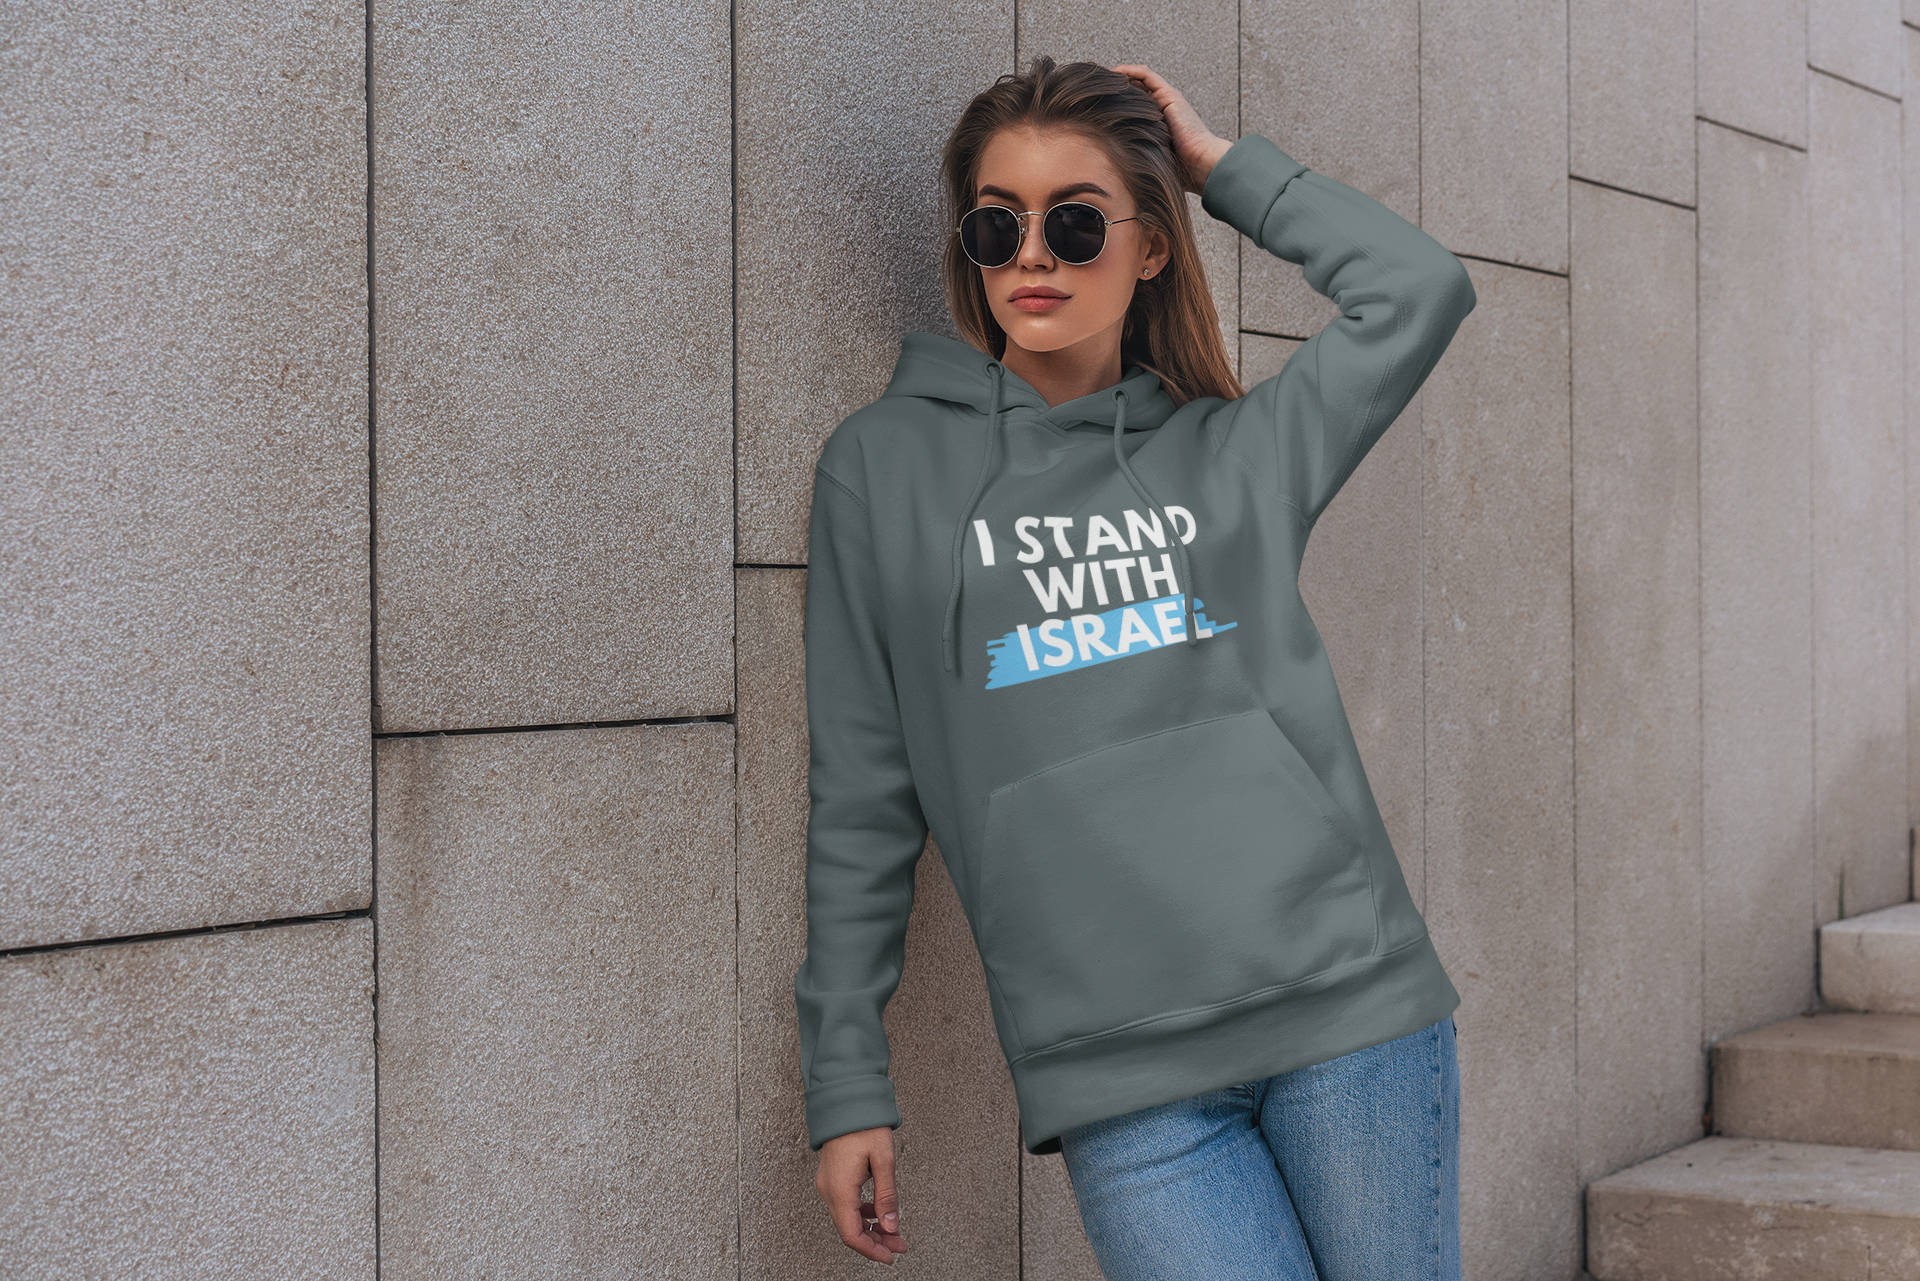 I Stand With Israel Hoodies Women